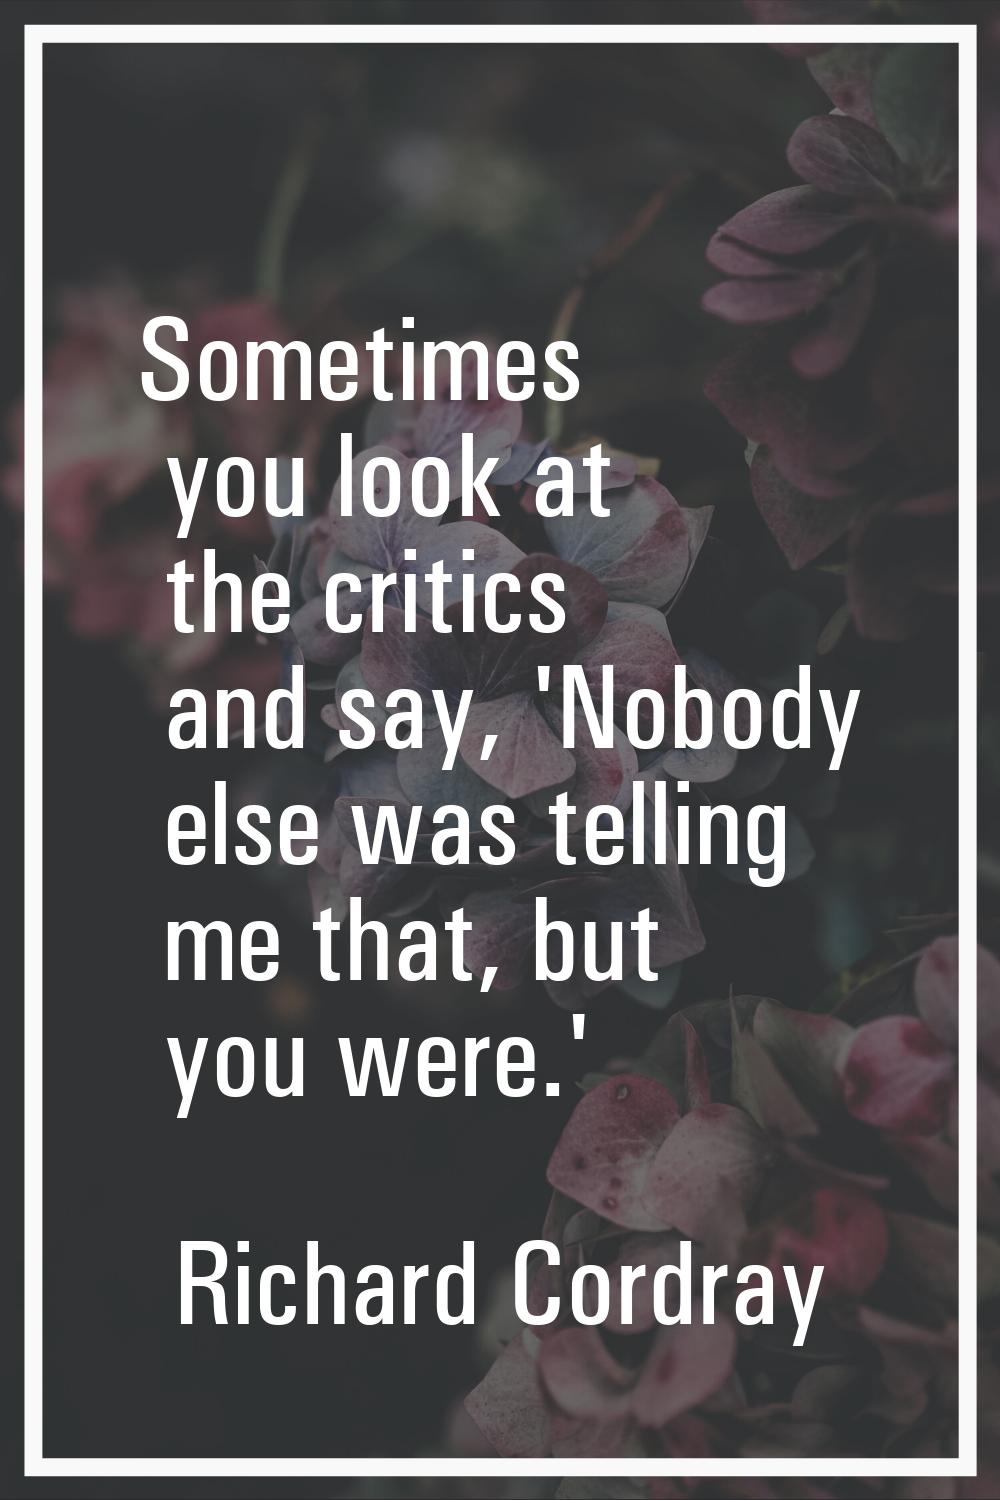 Sometimes you look at the critics and say, 'Nobody else was telling me that, but you were.'